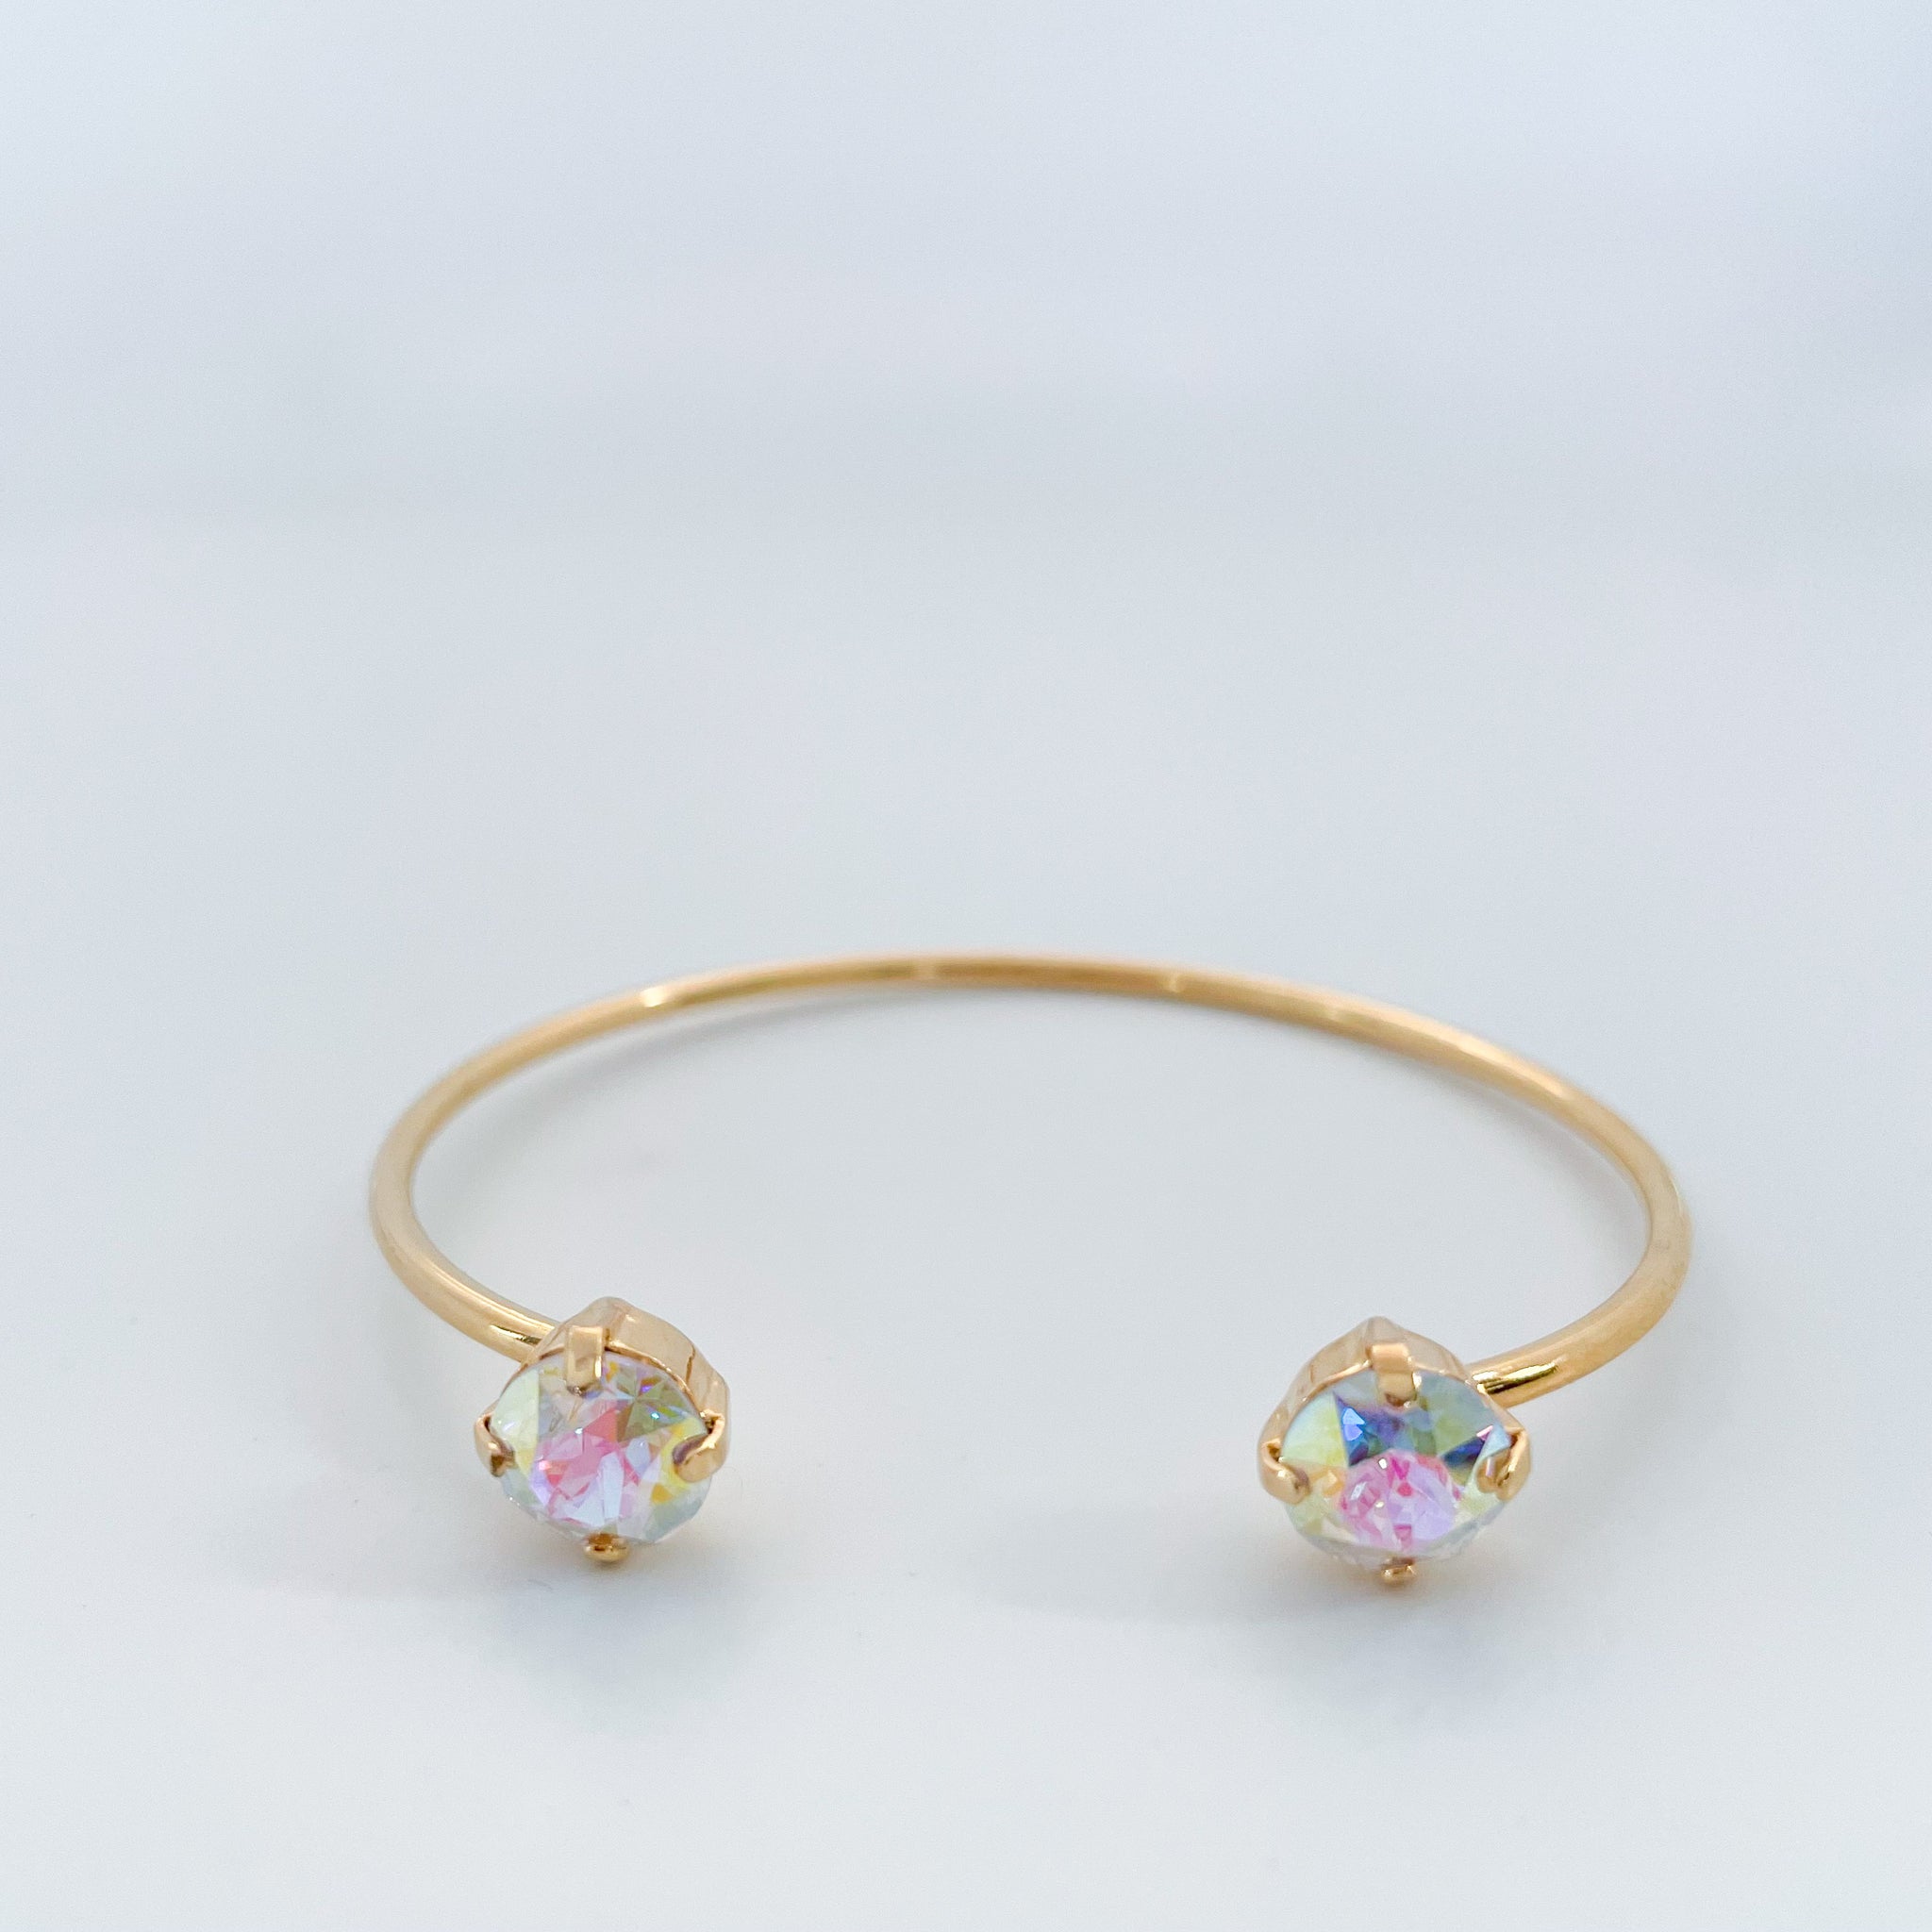 Icicle Bangle by The Sparkled Shell